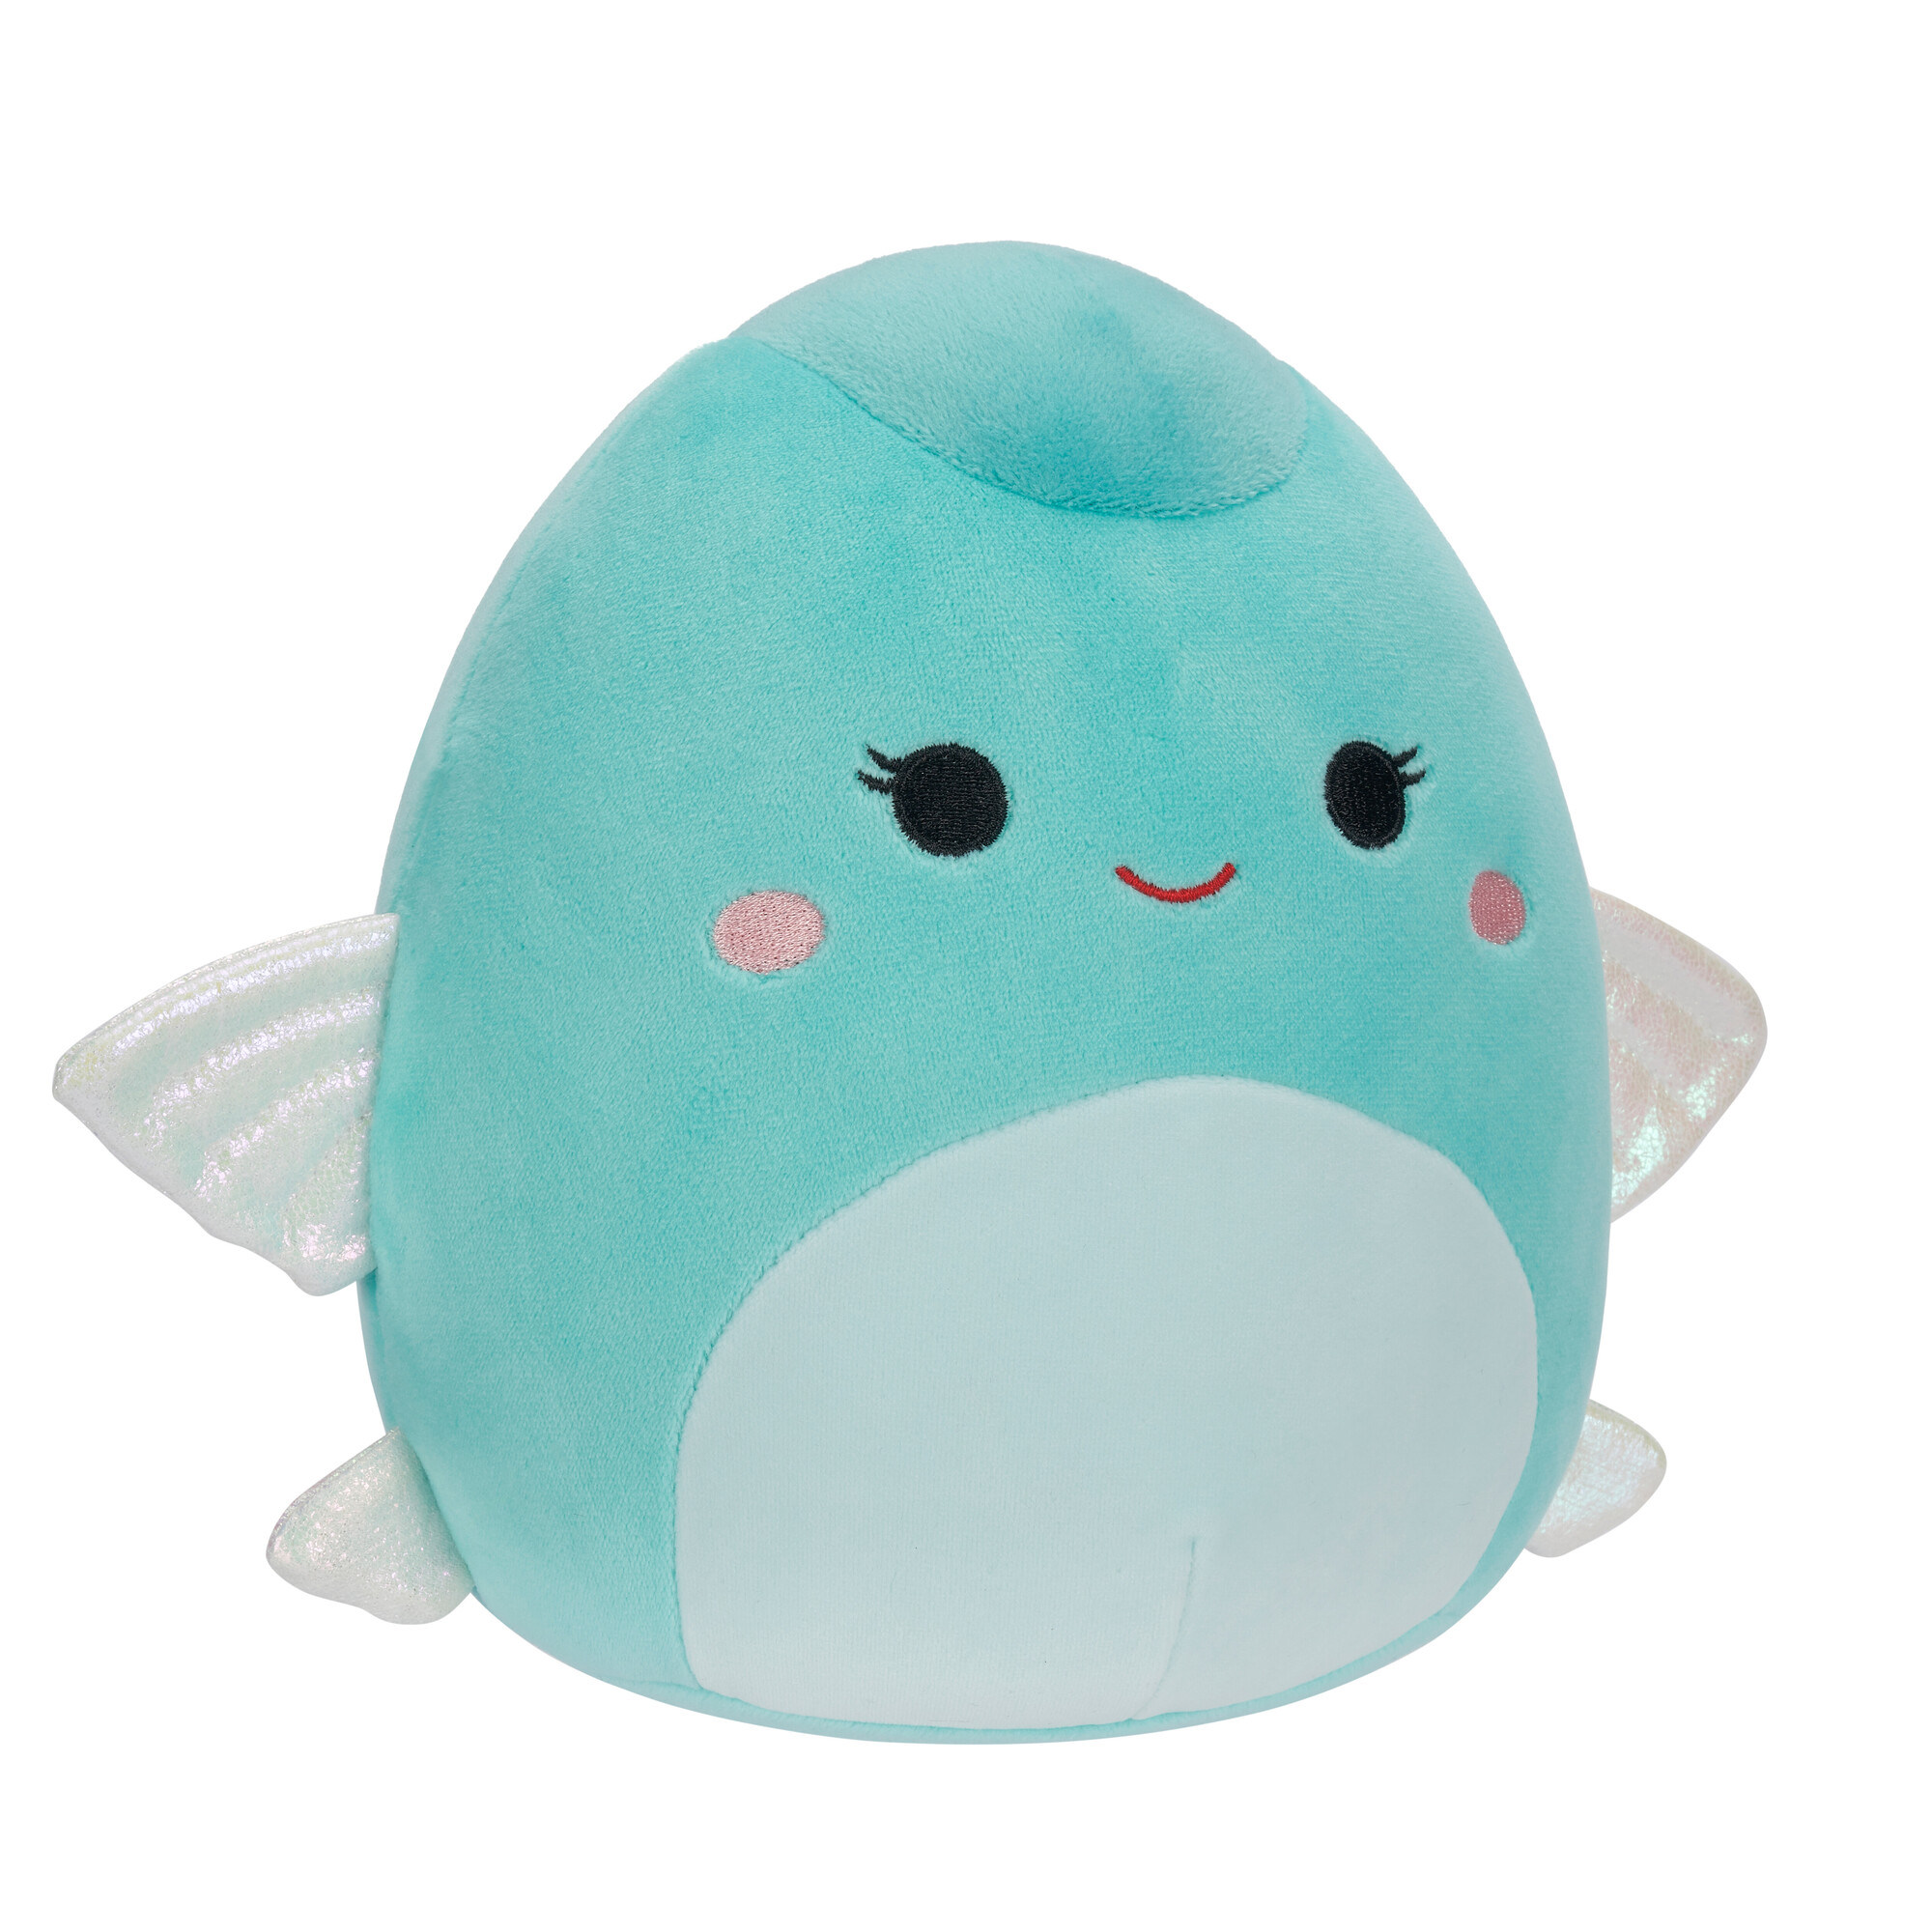 Squishmallows 7.5-Inch Janie the Teal Flying Fish